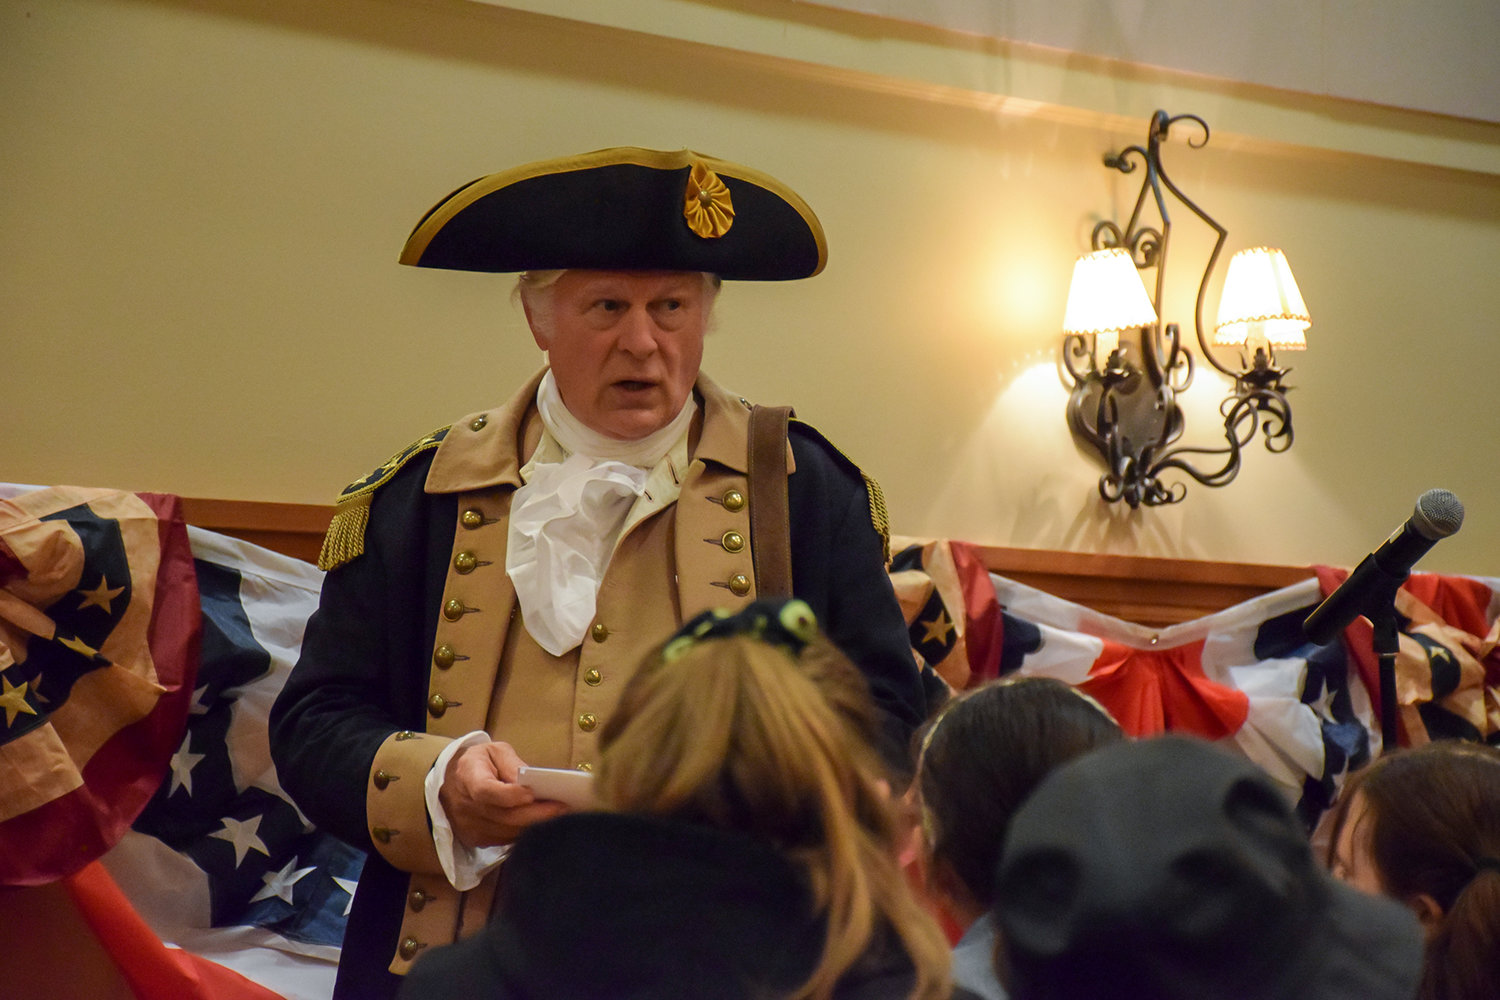 George Washington reenactor Vern Frykholm speaks to Tukes Valley Middle School students during the Sons of the American Revolution convention at the Heathman Lodge on April 9.